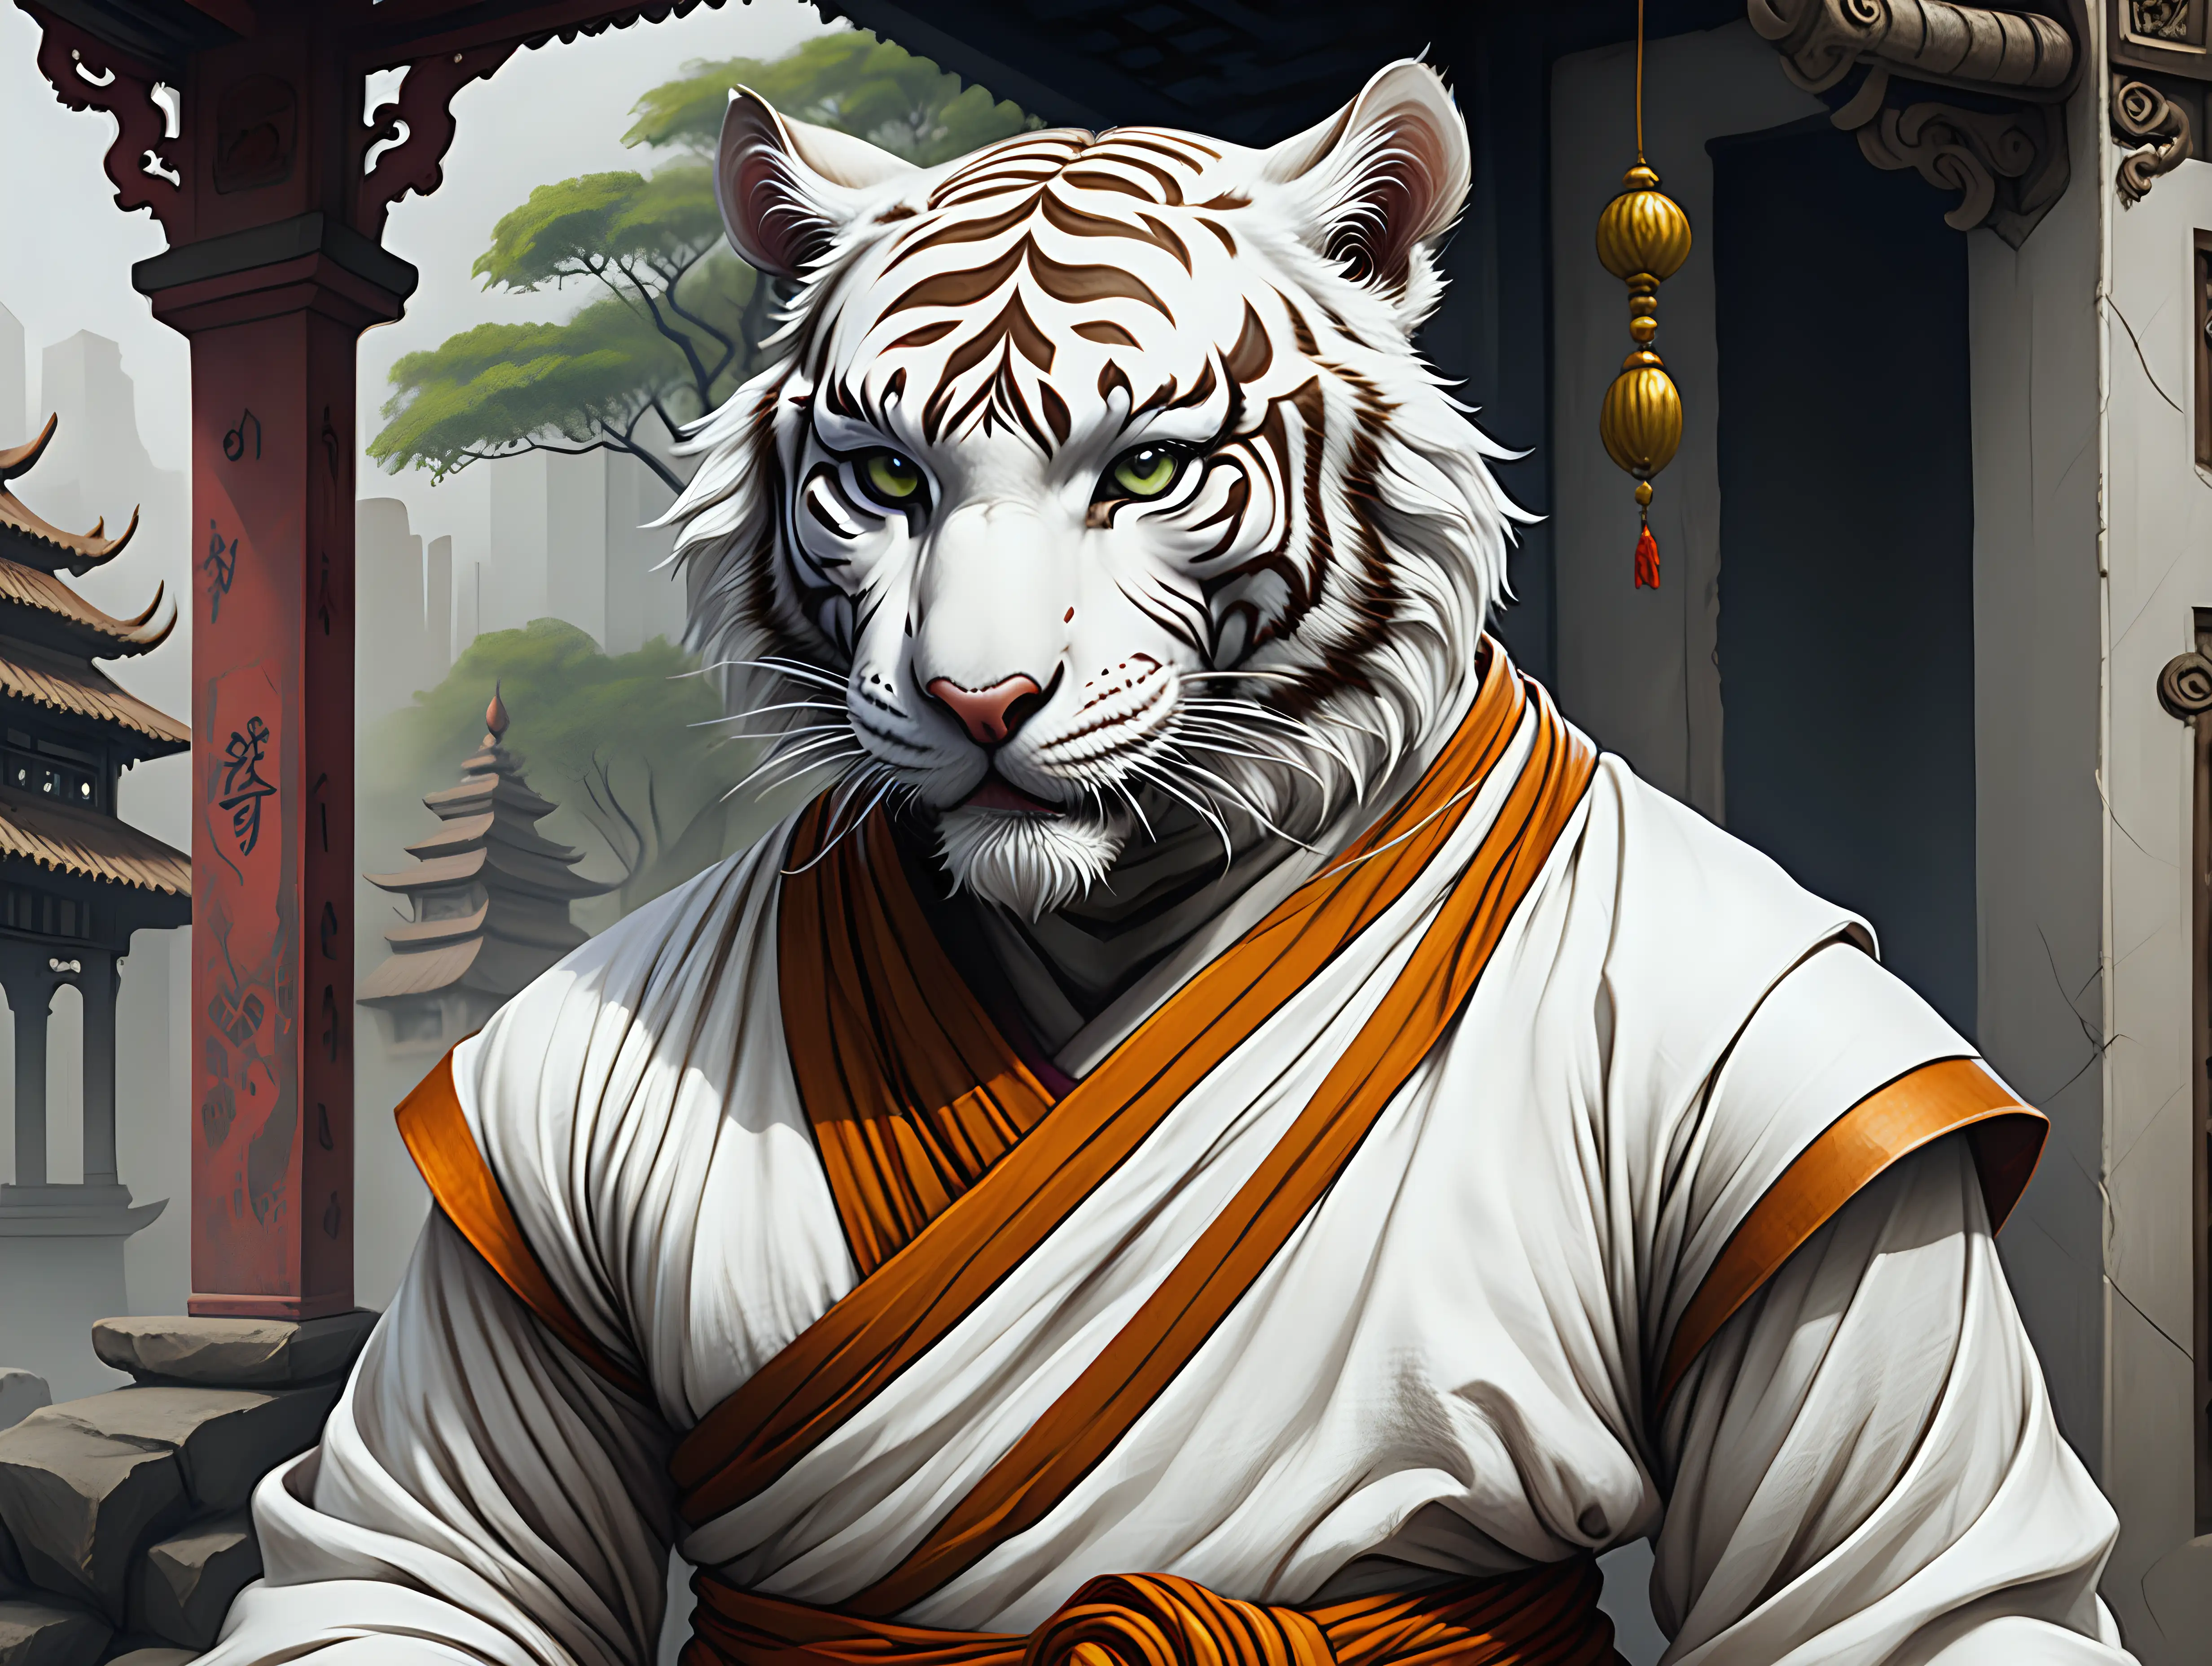 An anthropomorphic white tiger dressed as a monk